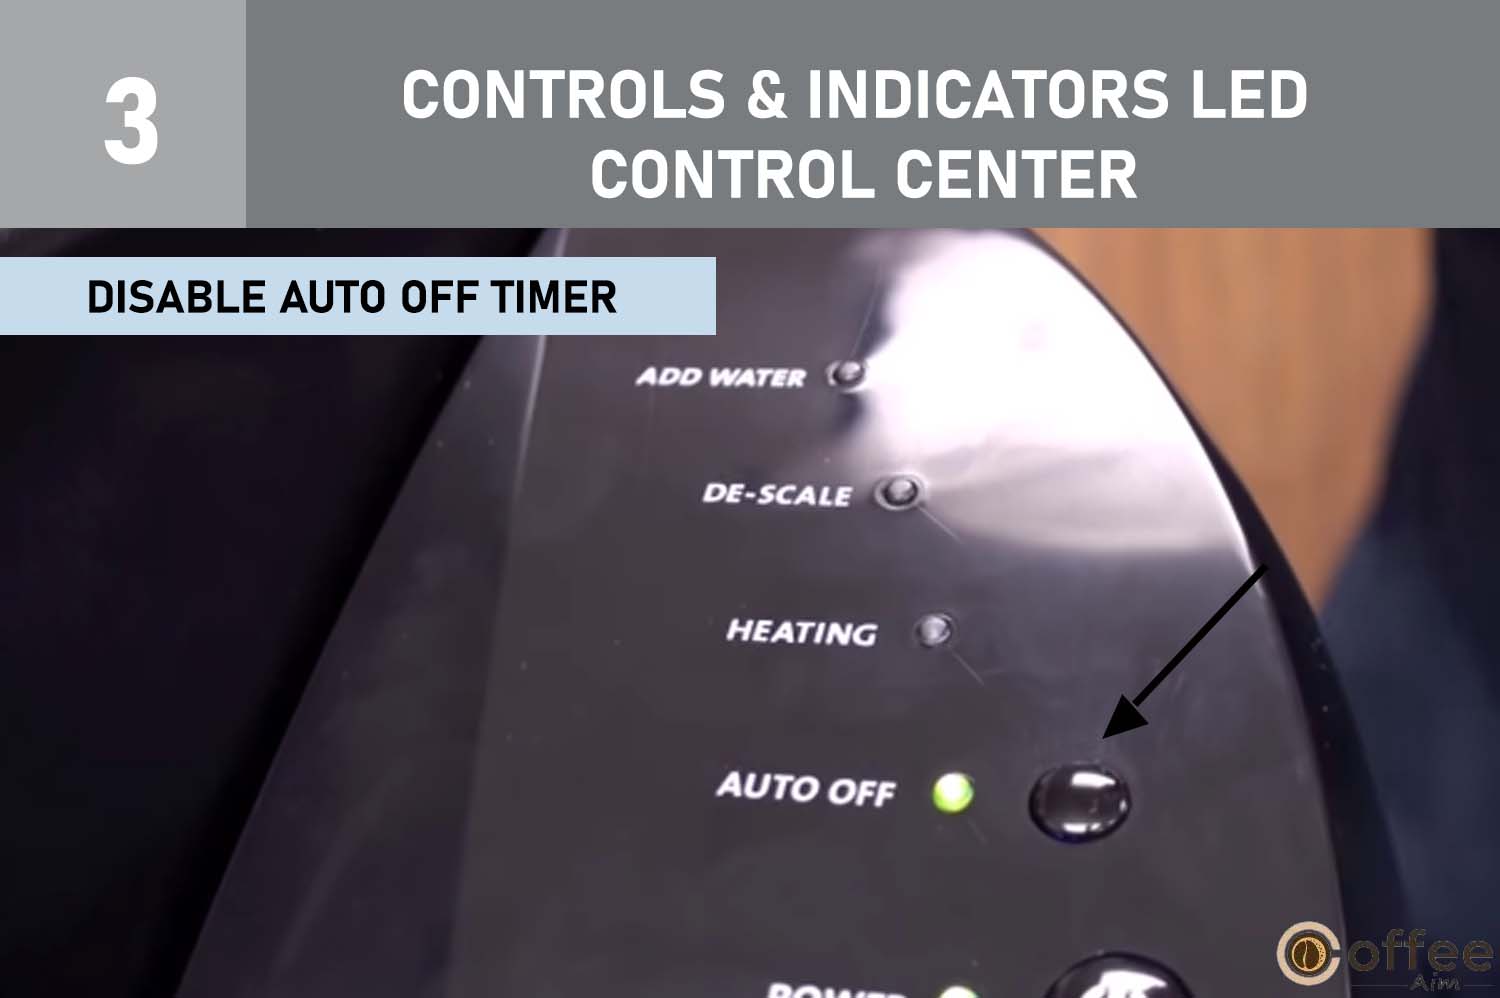 The depicted image illustrates the procedure to "Disable the Auto-Off Timer" under the section titled "CONTROLS & INDICATORS LED Control Center" within the comprehensive guide on effectively utilizing the Keurig B-40.